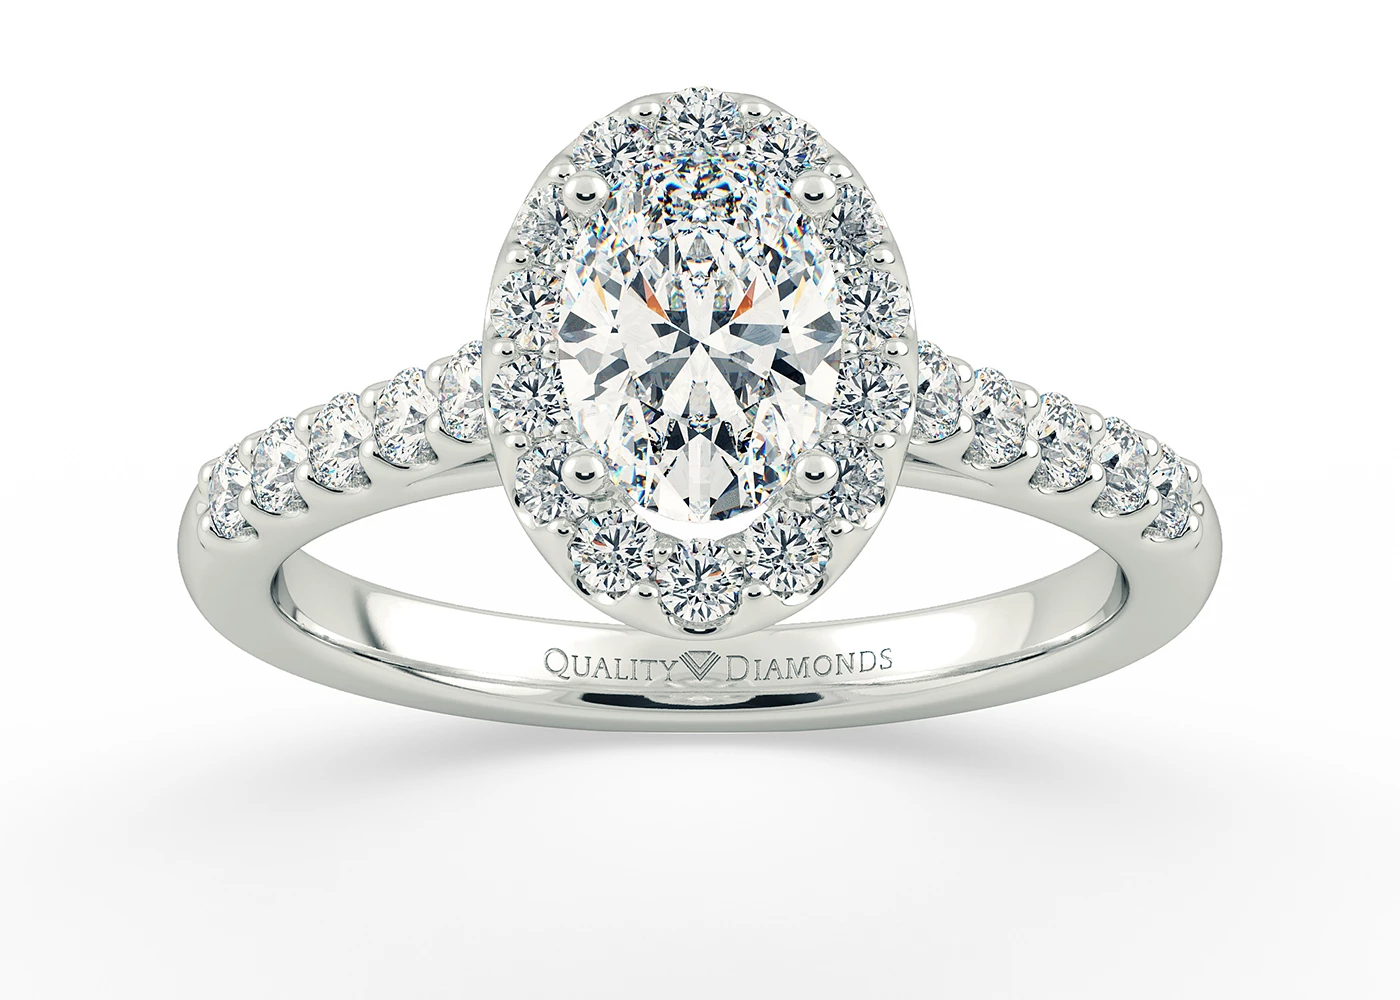 One Carat Lab Grown Oval Halo Diamond Ring in 18K White Gold